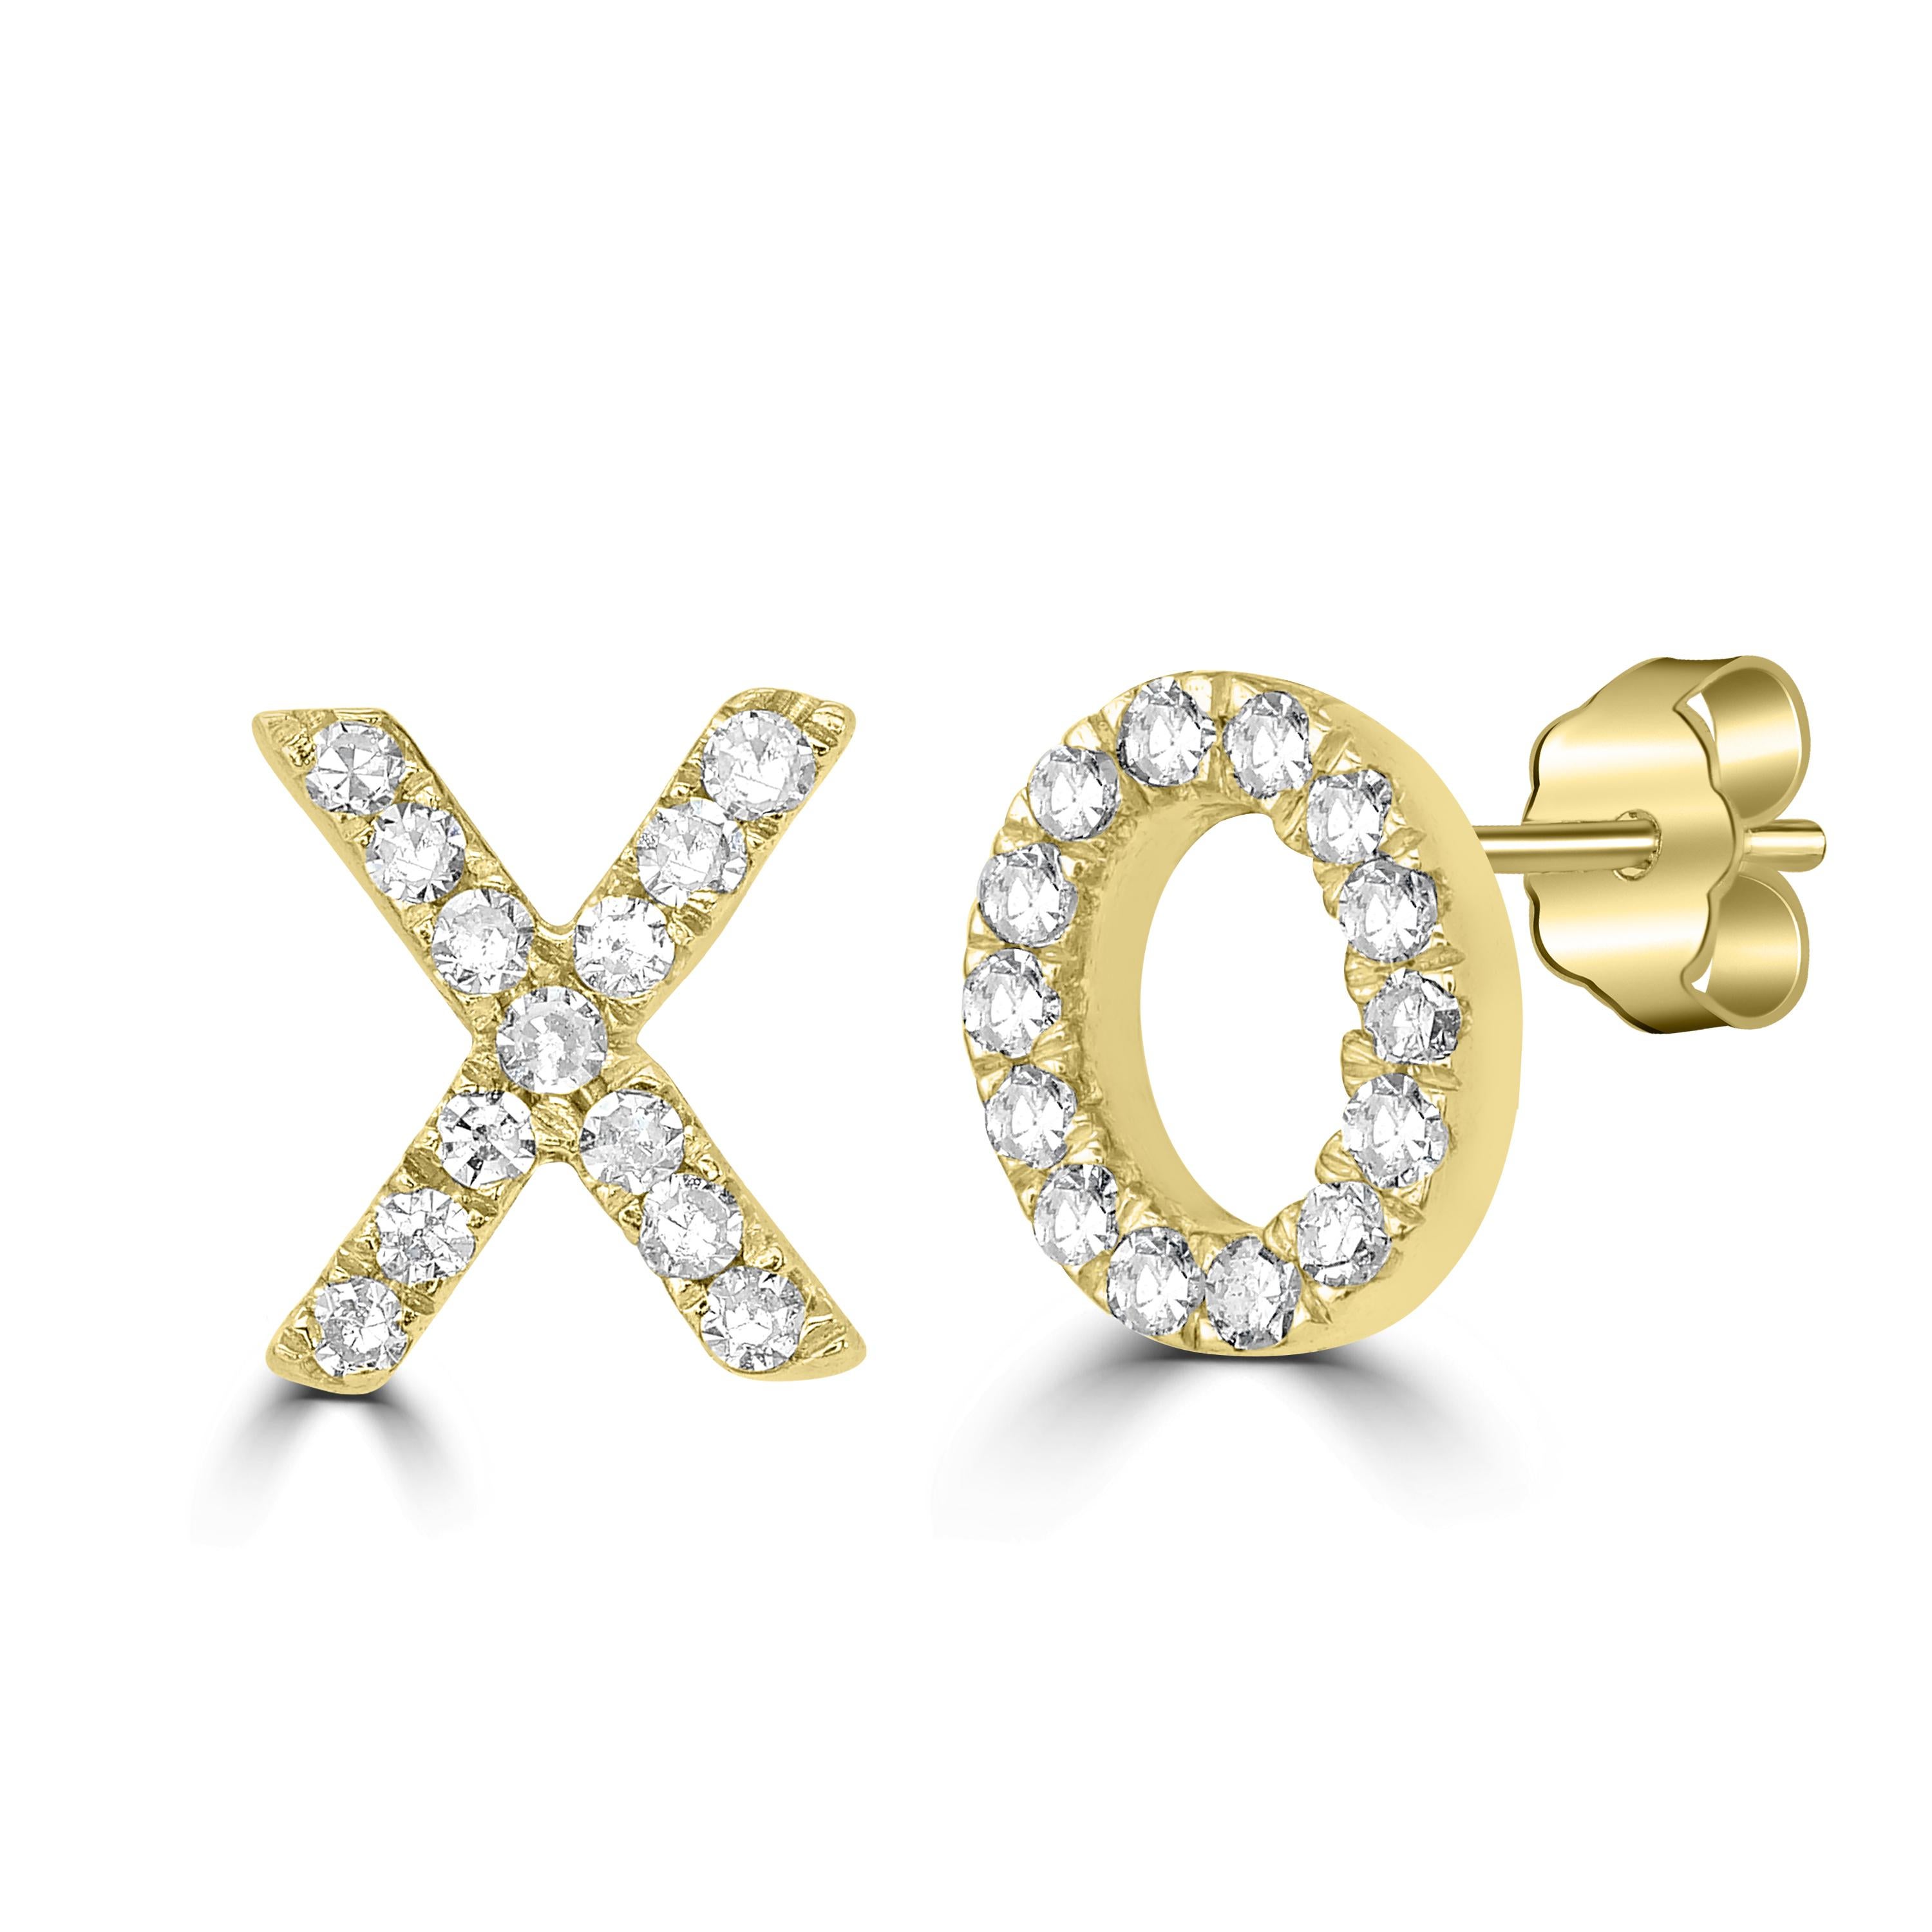 Add a charming final touch to any look with these beautiful XO diamond stud earrings by Luxle. The 0.07 carat round single-cut diamonds in these earrings lend a playful touch to your wardrobe. These earrings, which are made of 14K yellow gold, are a